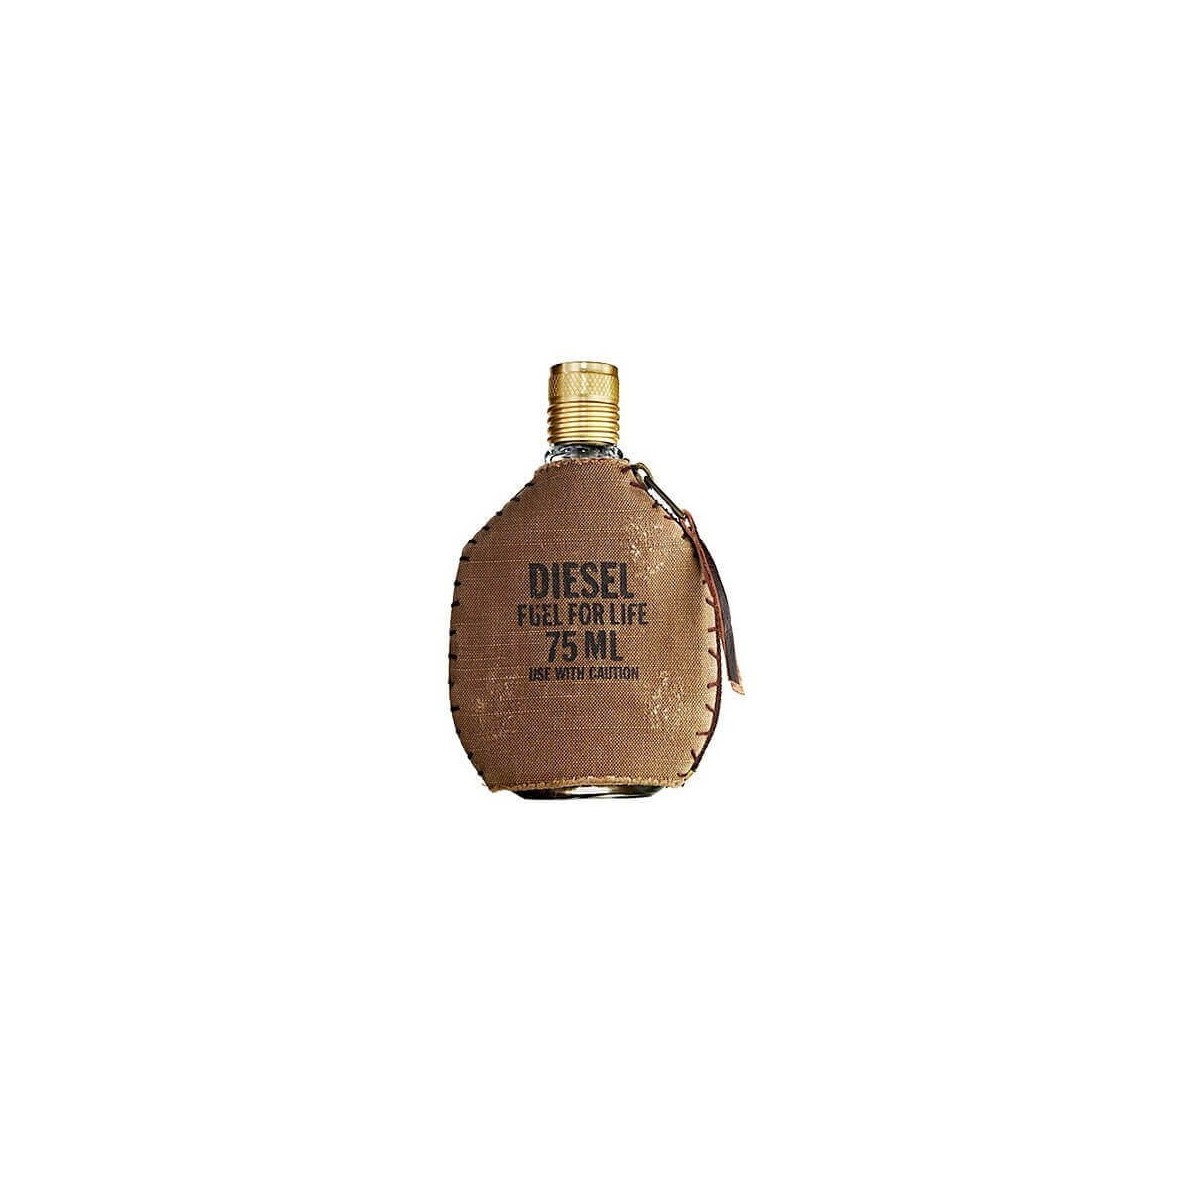 Diesel Fuel For Life Pour Homme After Shave Lotion 75ml